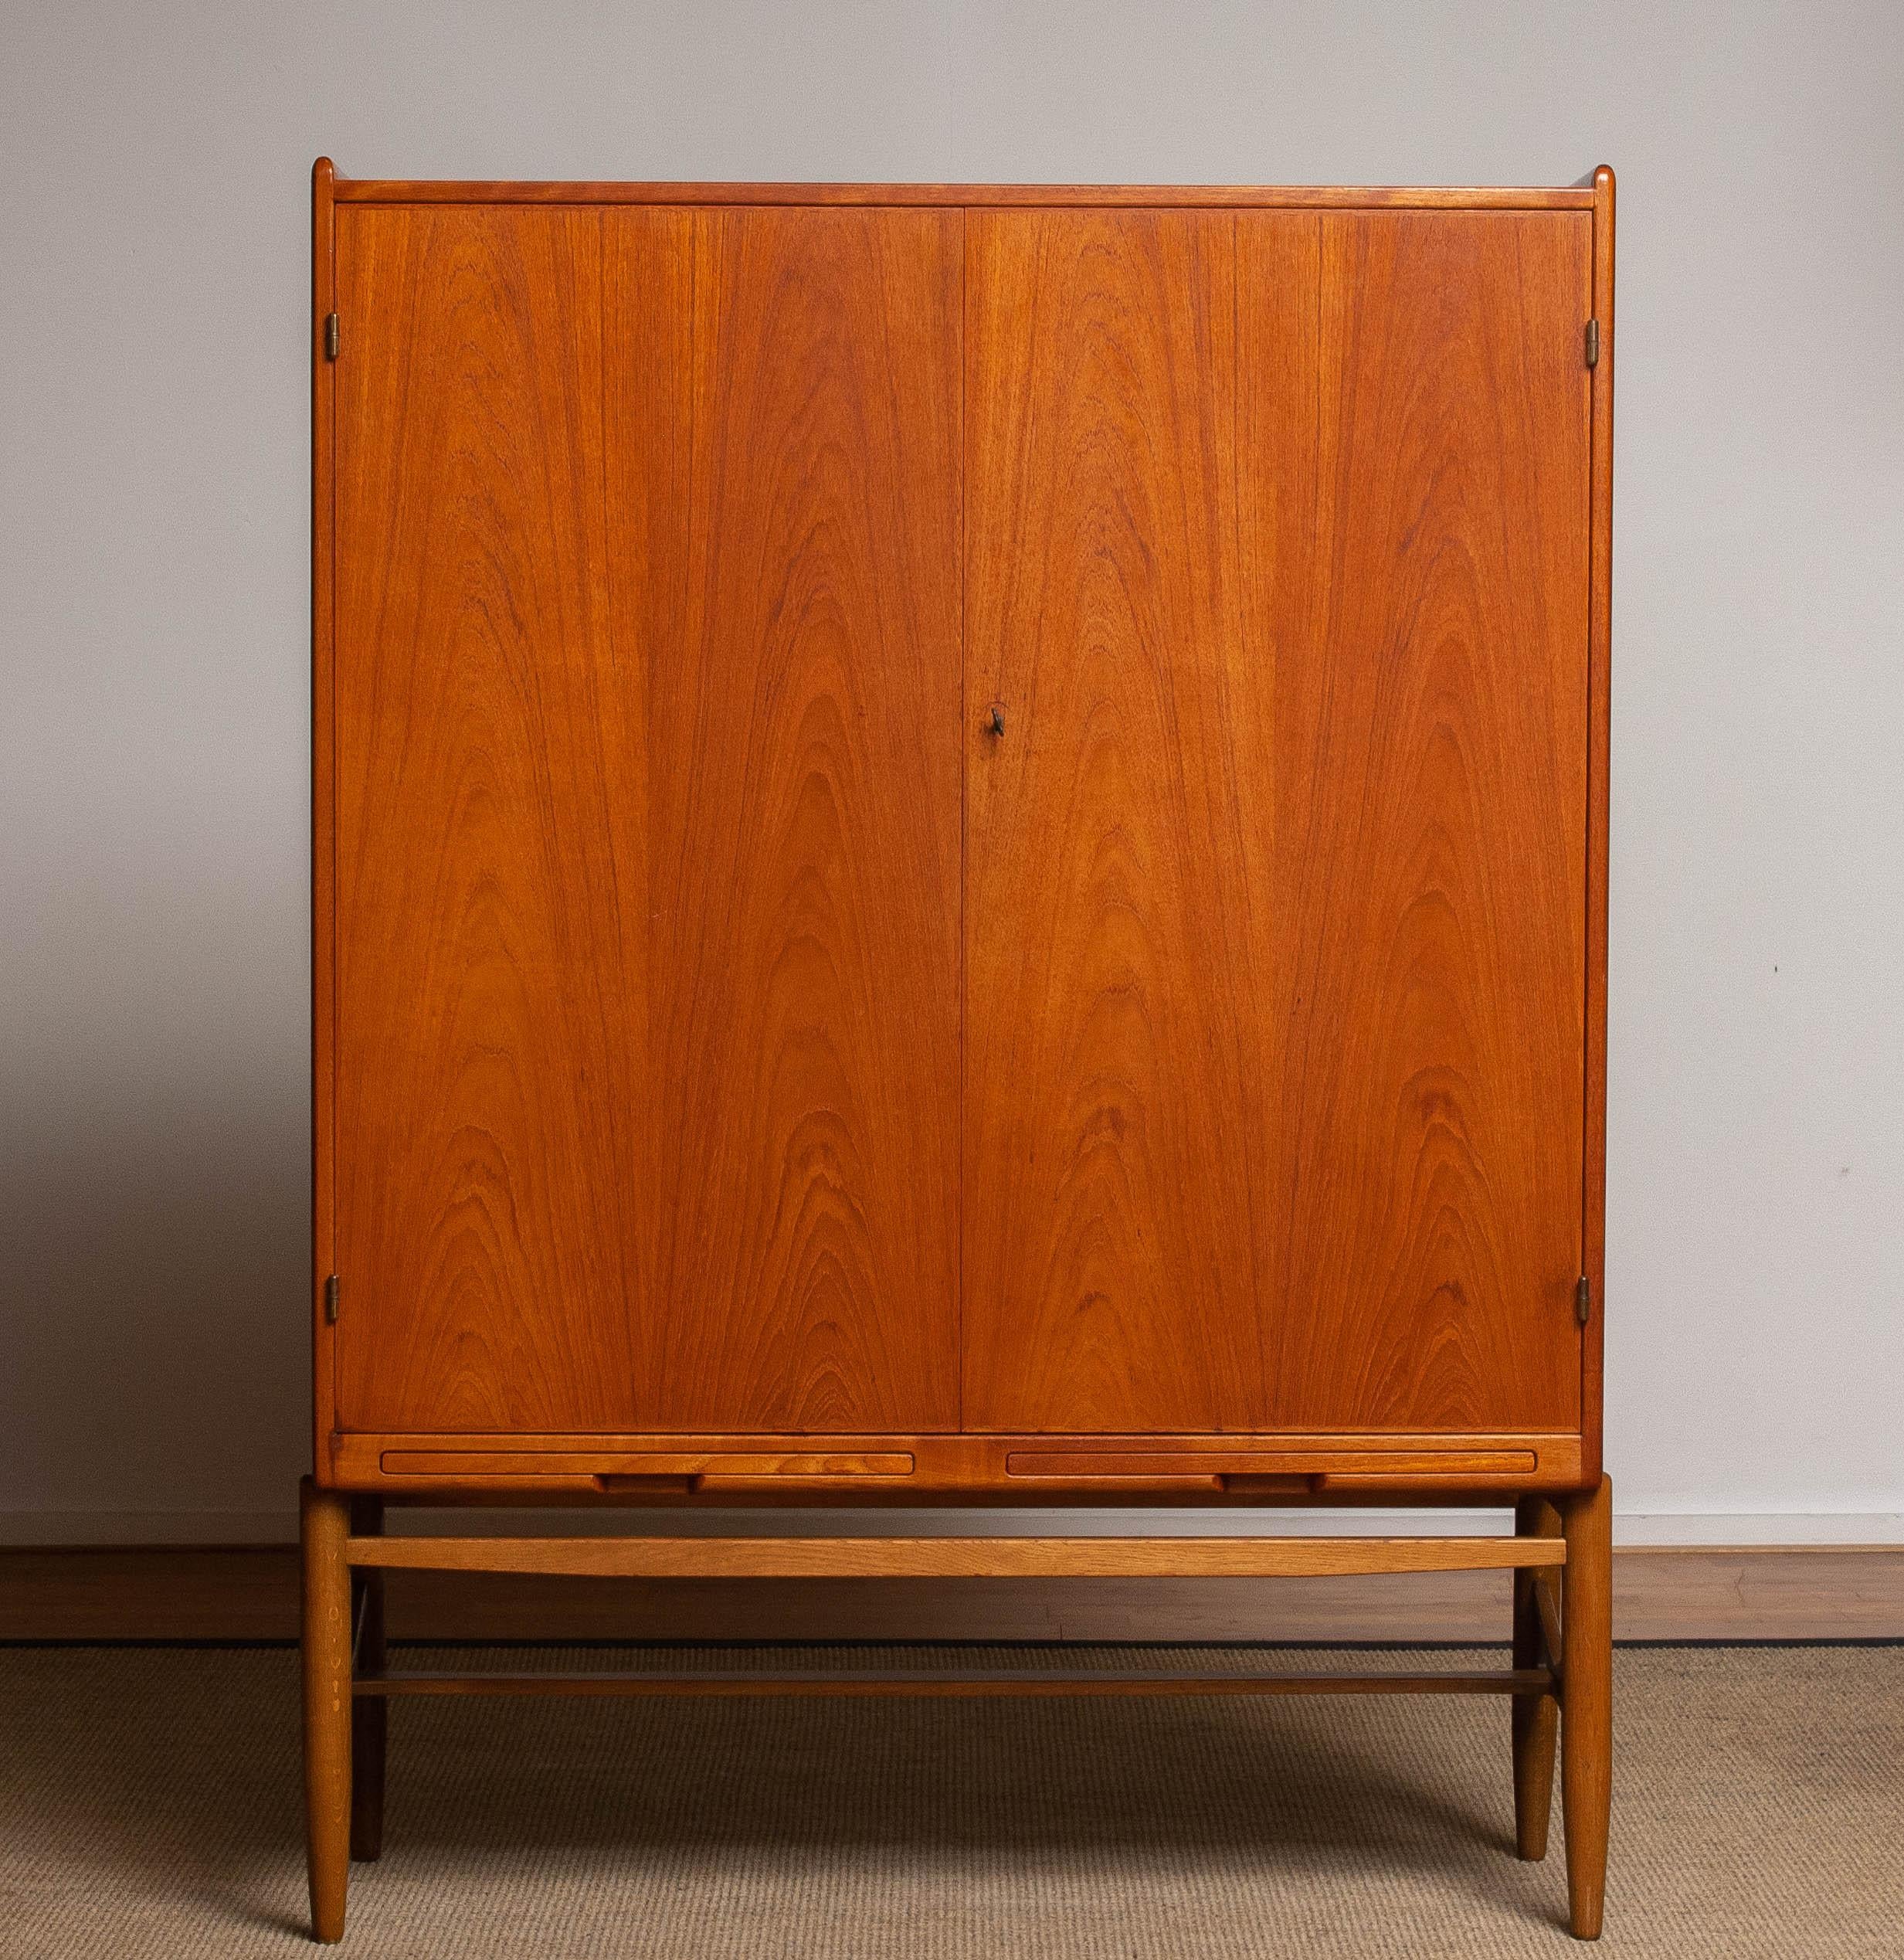 Mid-20th Century 1960's Scandinavian House Keepers / Storage Cabinet in Teak and Oak by Westbergs